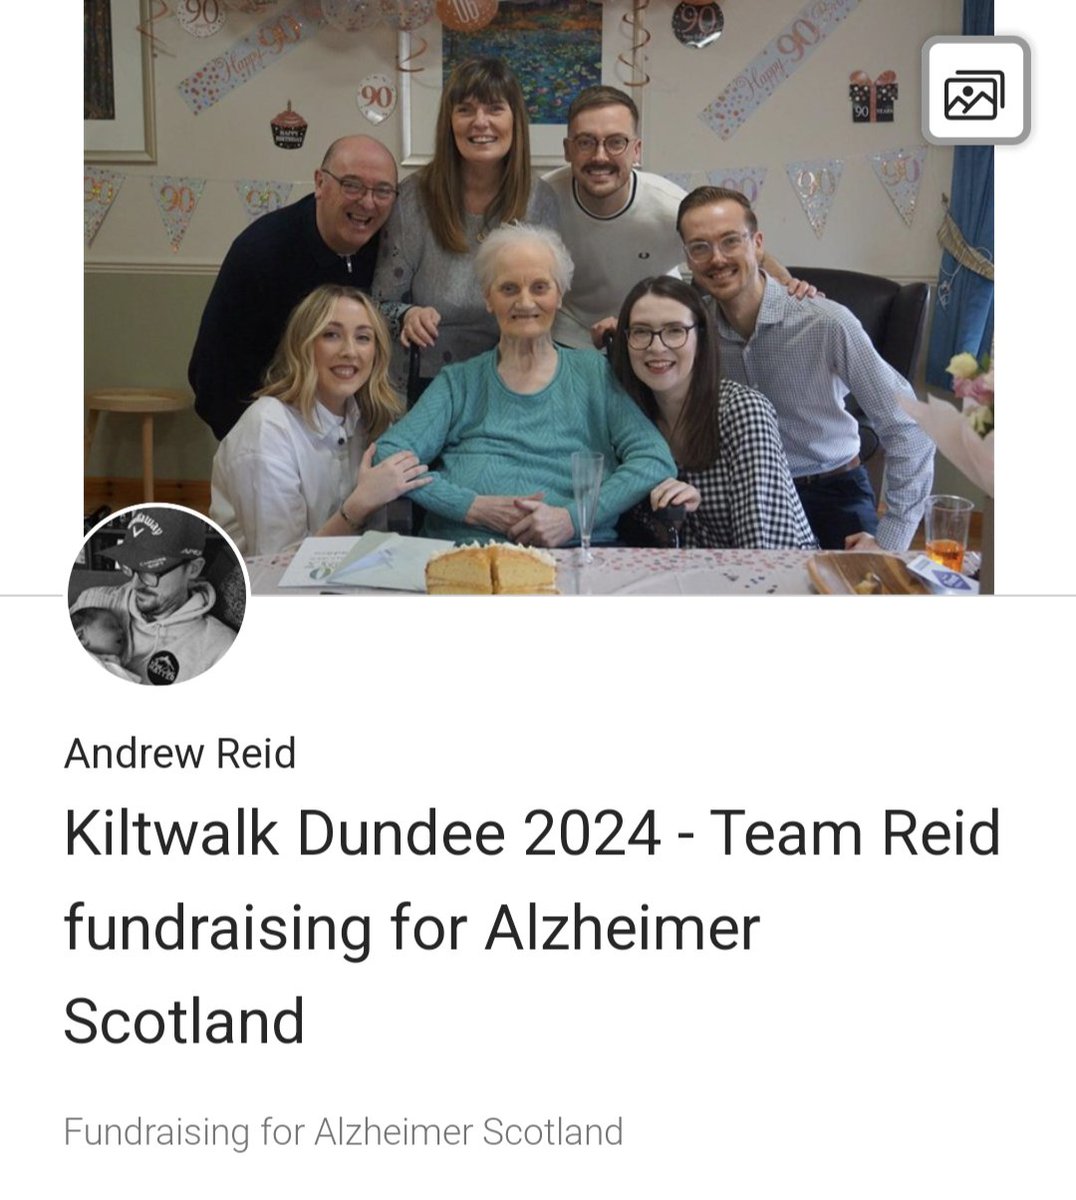 I'll be taking part in @thekiltwalk (Dundee) on Sunday 11th August alongside my dad and @grantreid1, in aid of @alzscot. As first-timers, we thought we'd ease into it... by doing the full 21.5-mile route. 😅 Any acts of generosity (donation, RT) very much appreciated! ✨